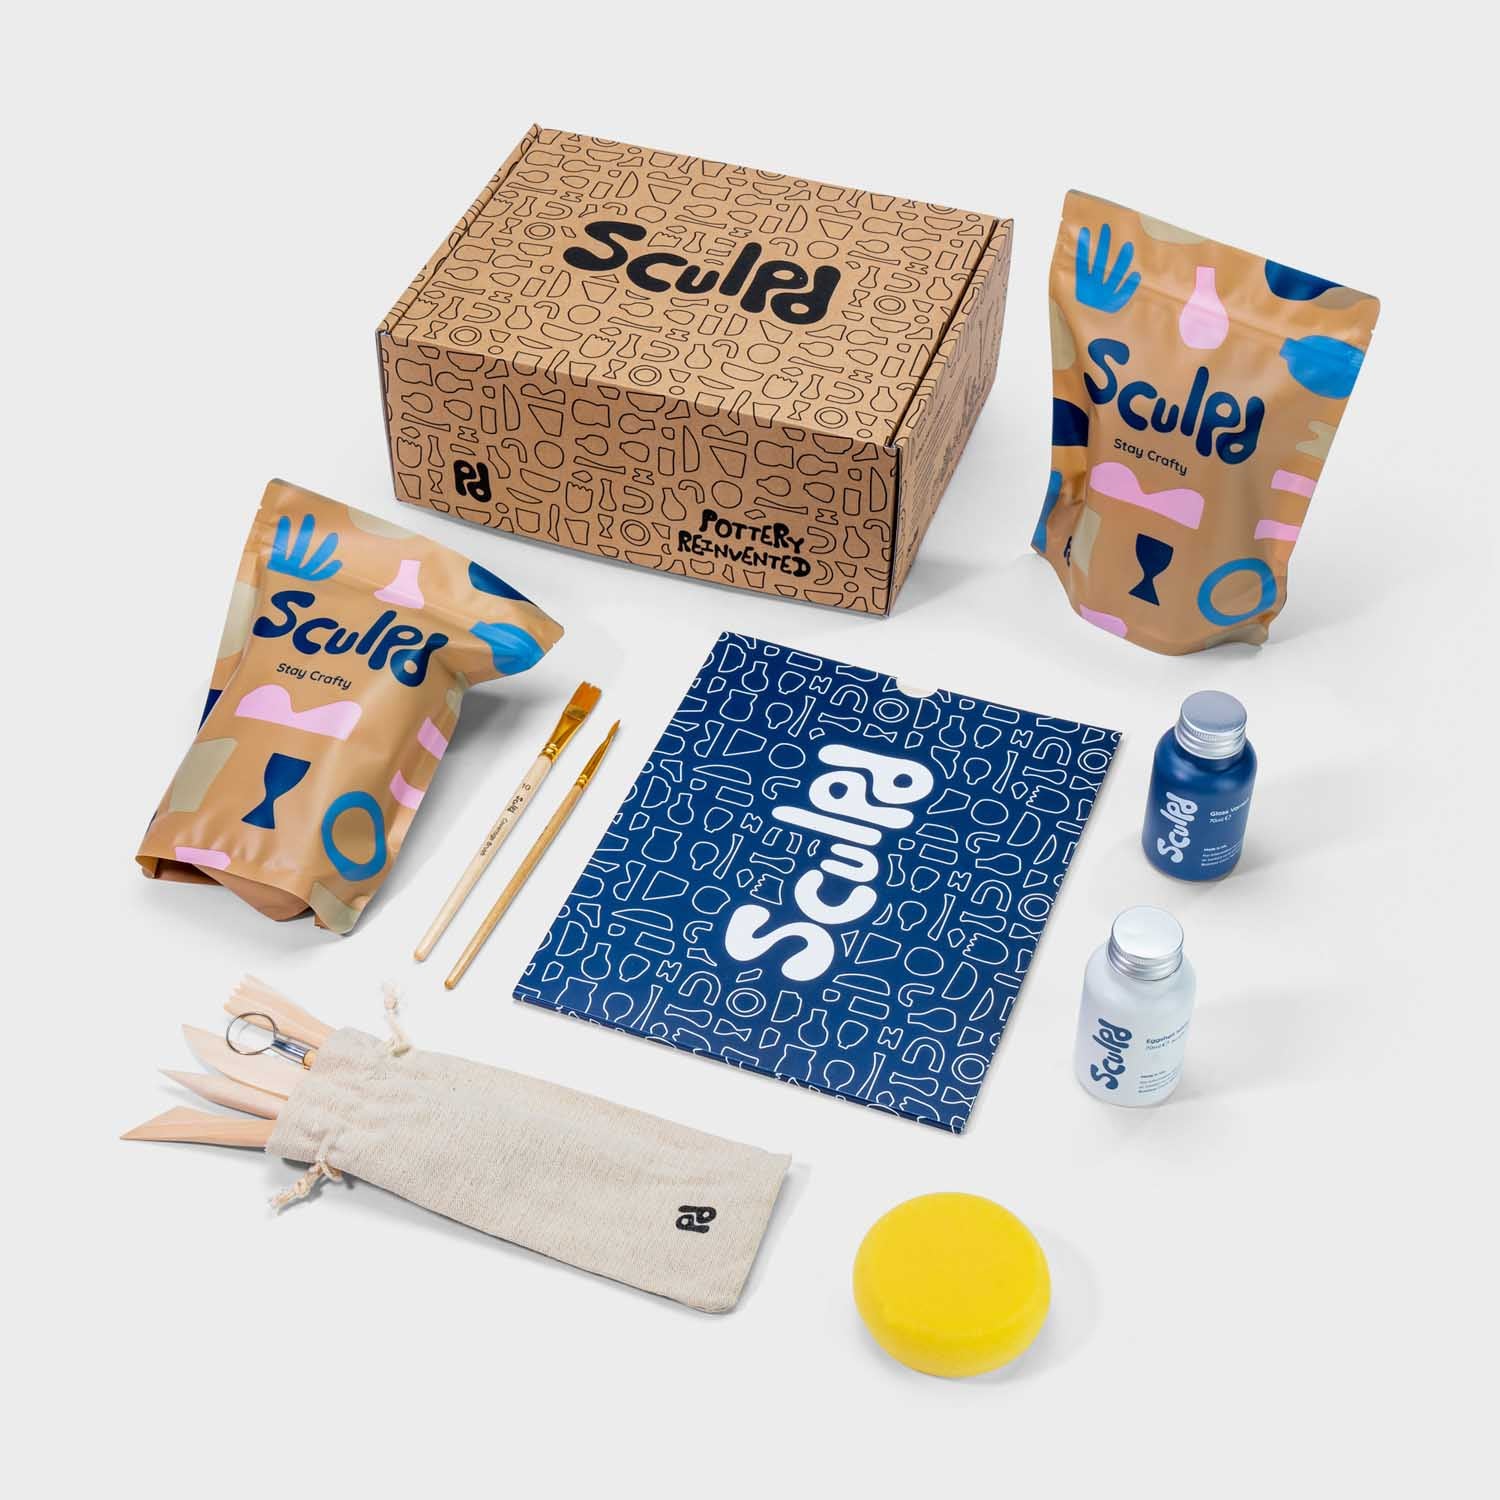  Sculpd Pottery Starter Kit - Air Dry Clay With Gloss Varnish,  Tools, Paints and Brushes for Beginners. Step-by-Step Guide Included. :  Arts, Crafts & Sewing